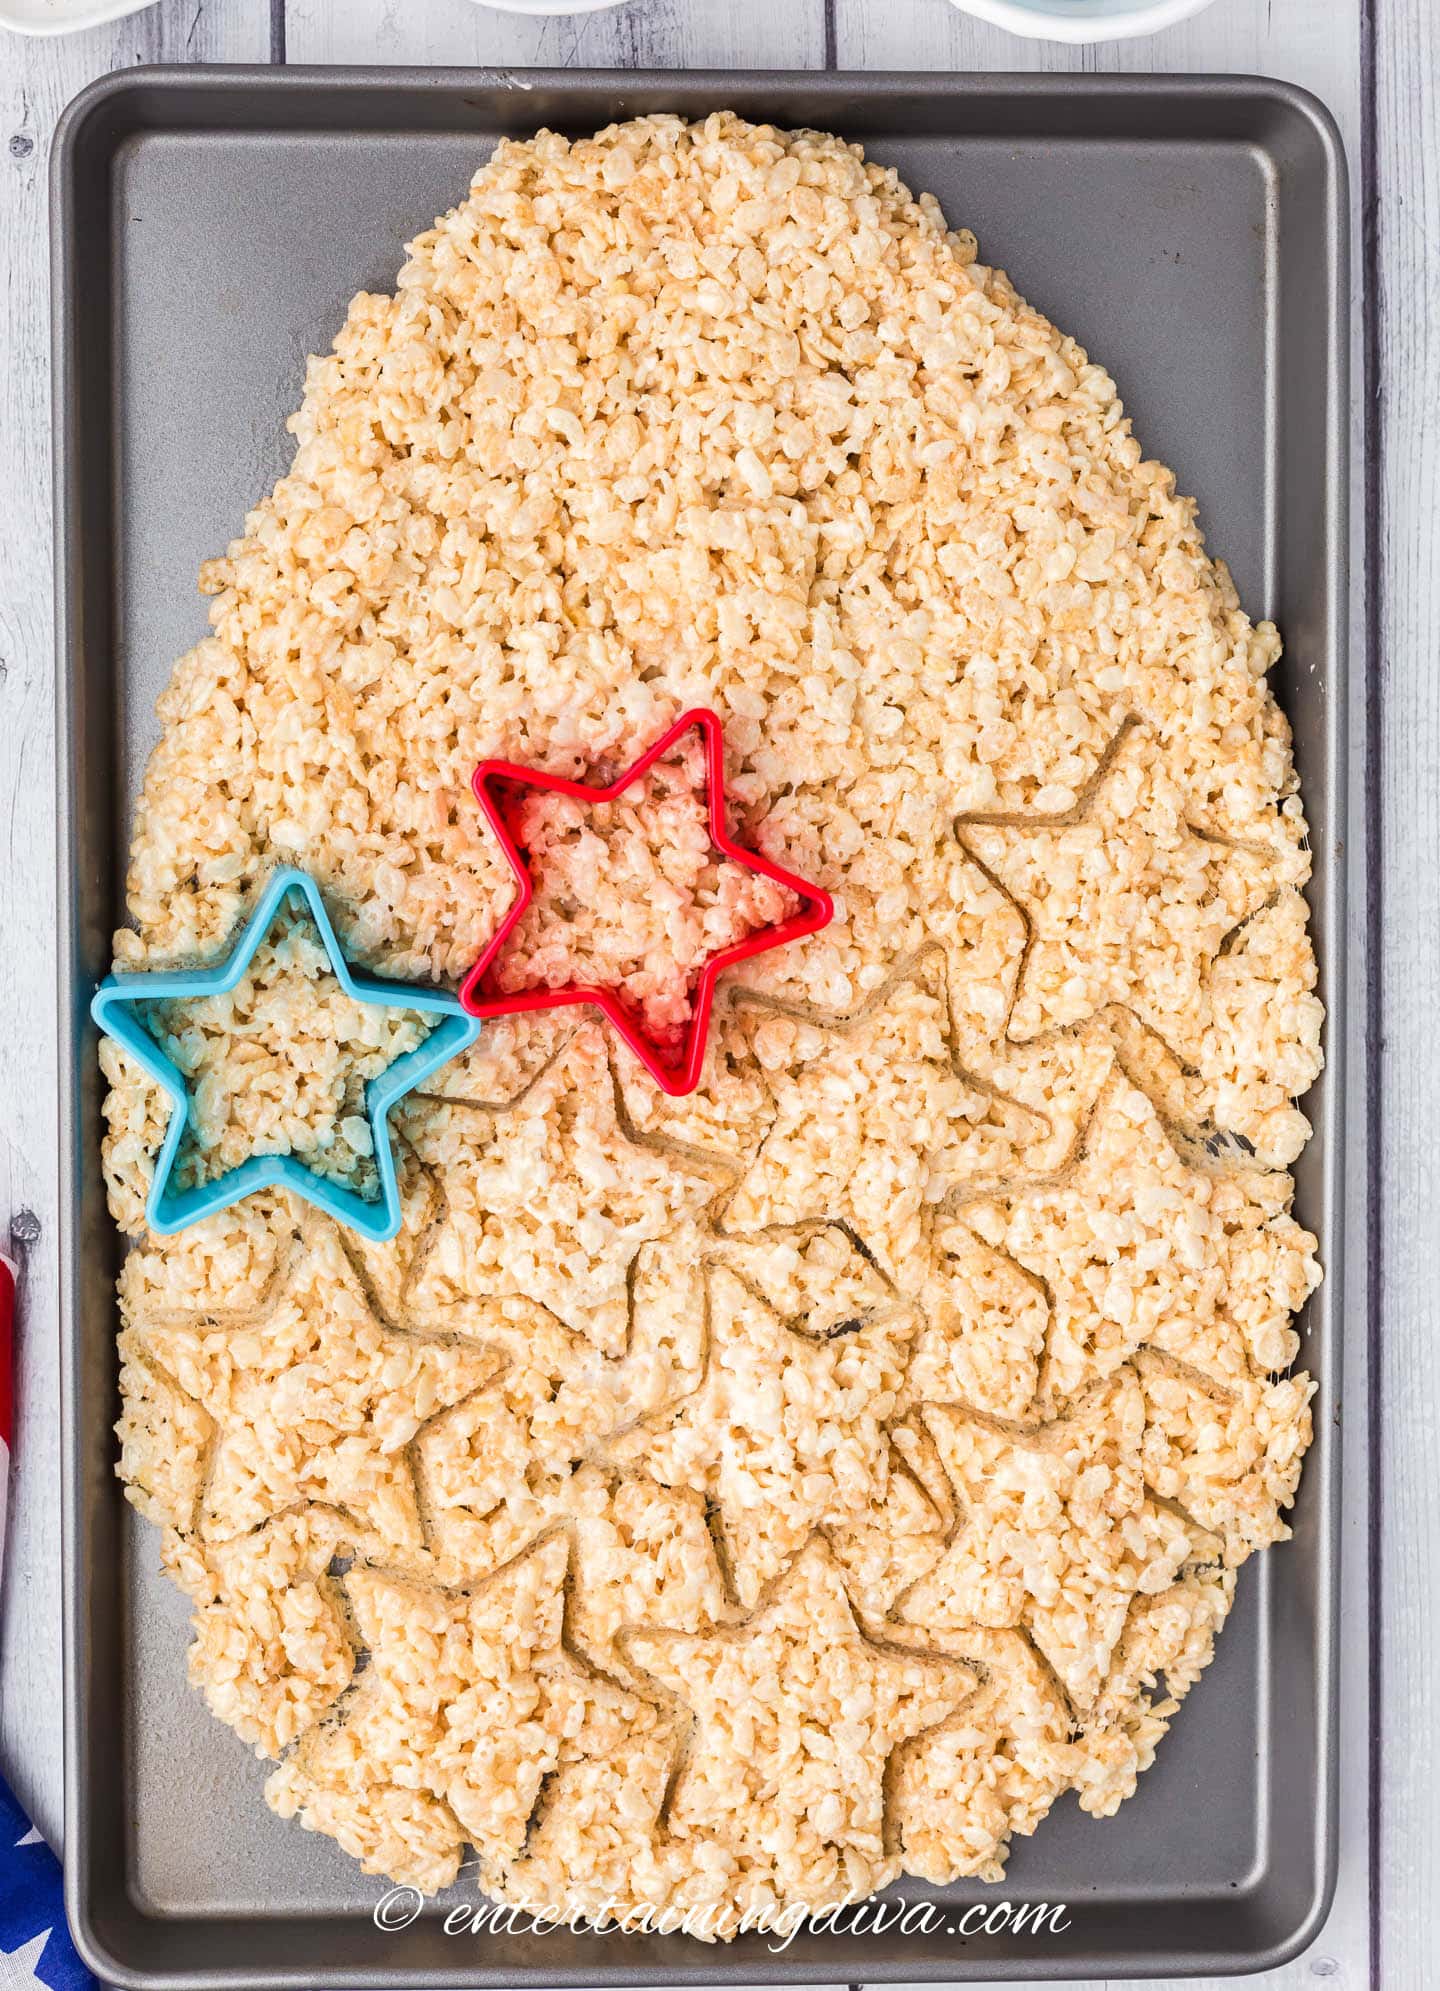 Star cookie cutters cutting Rice Krispie treats into star shapes on a baking sheet